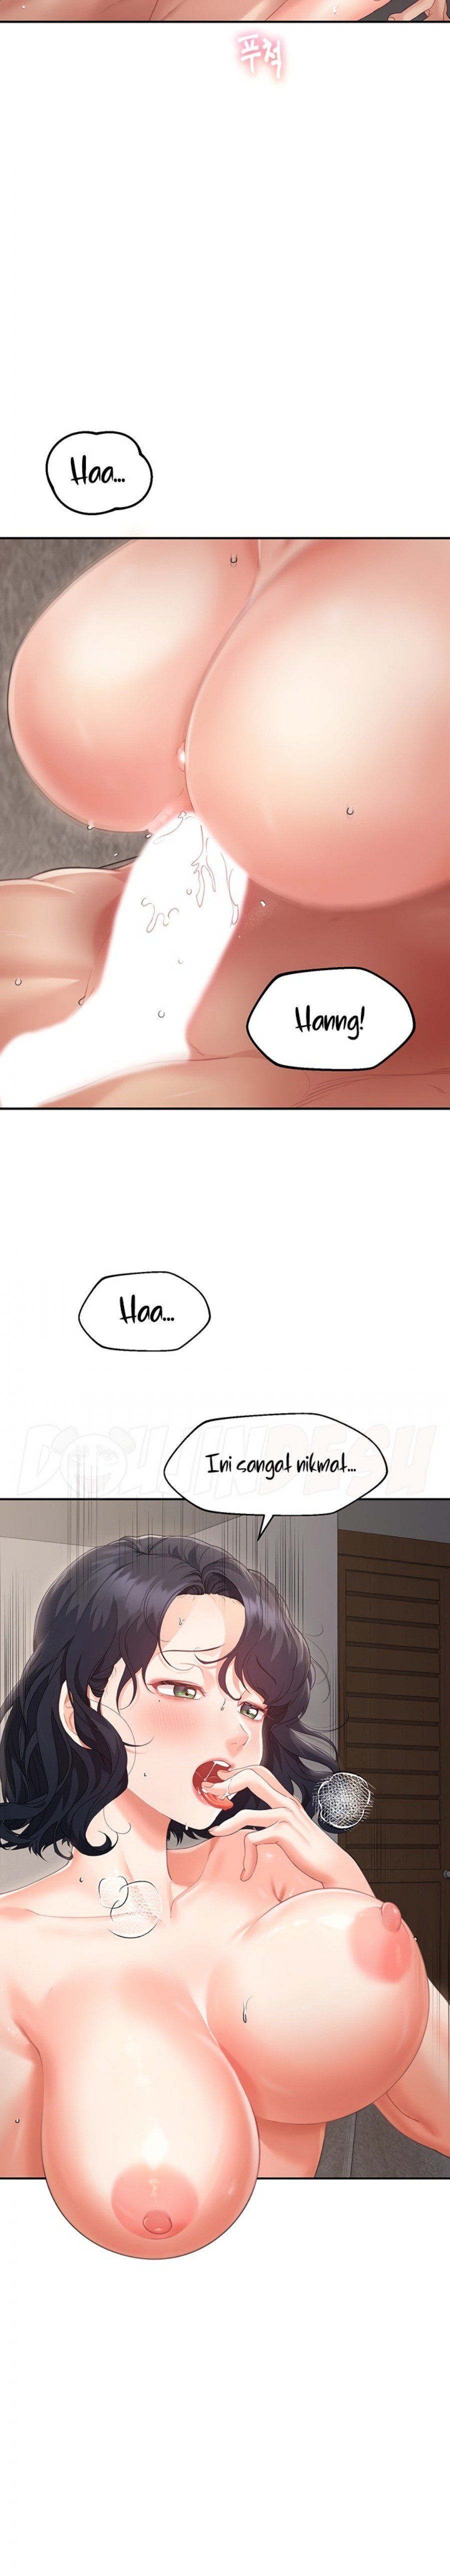 is-it-your-mother-or-sister-raw-chap-3-17